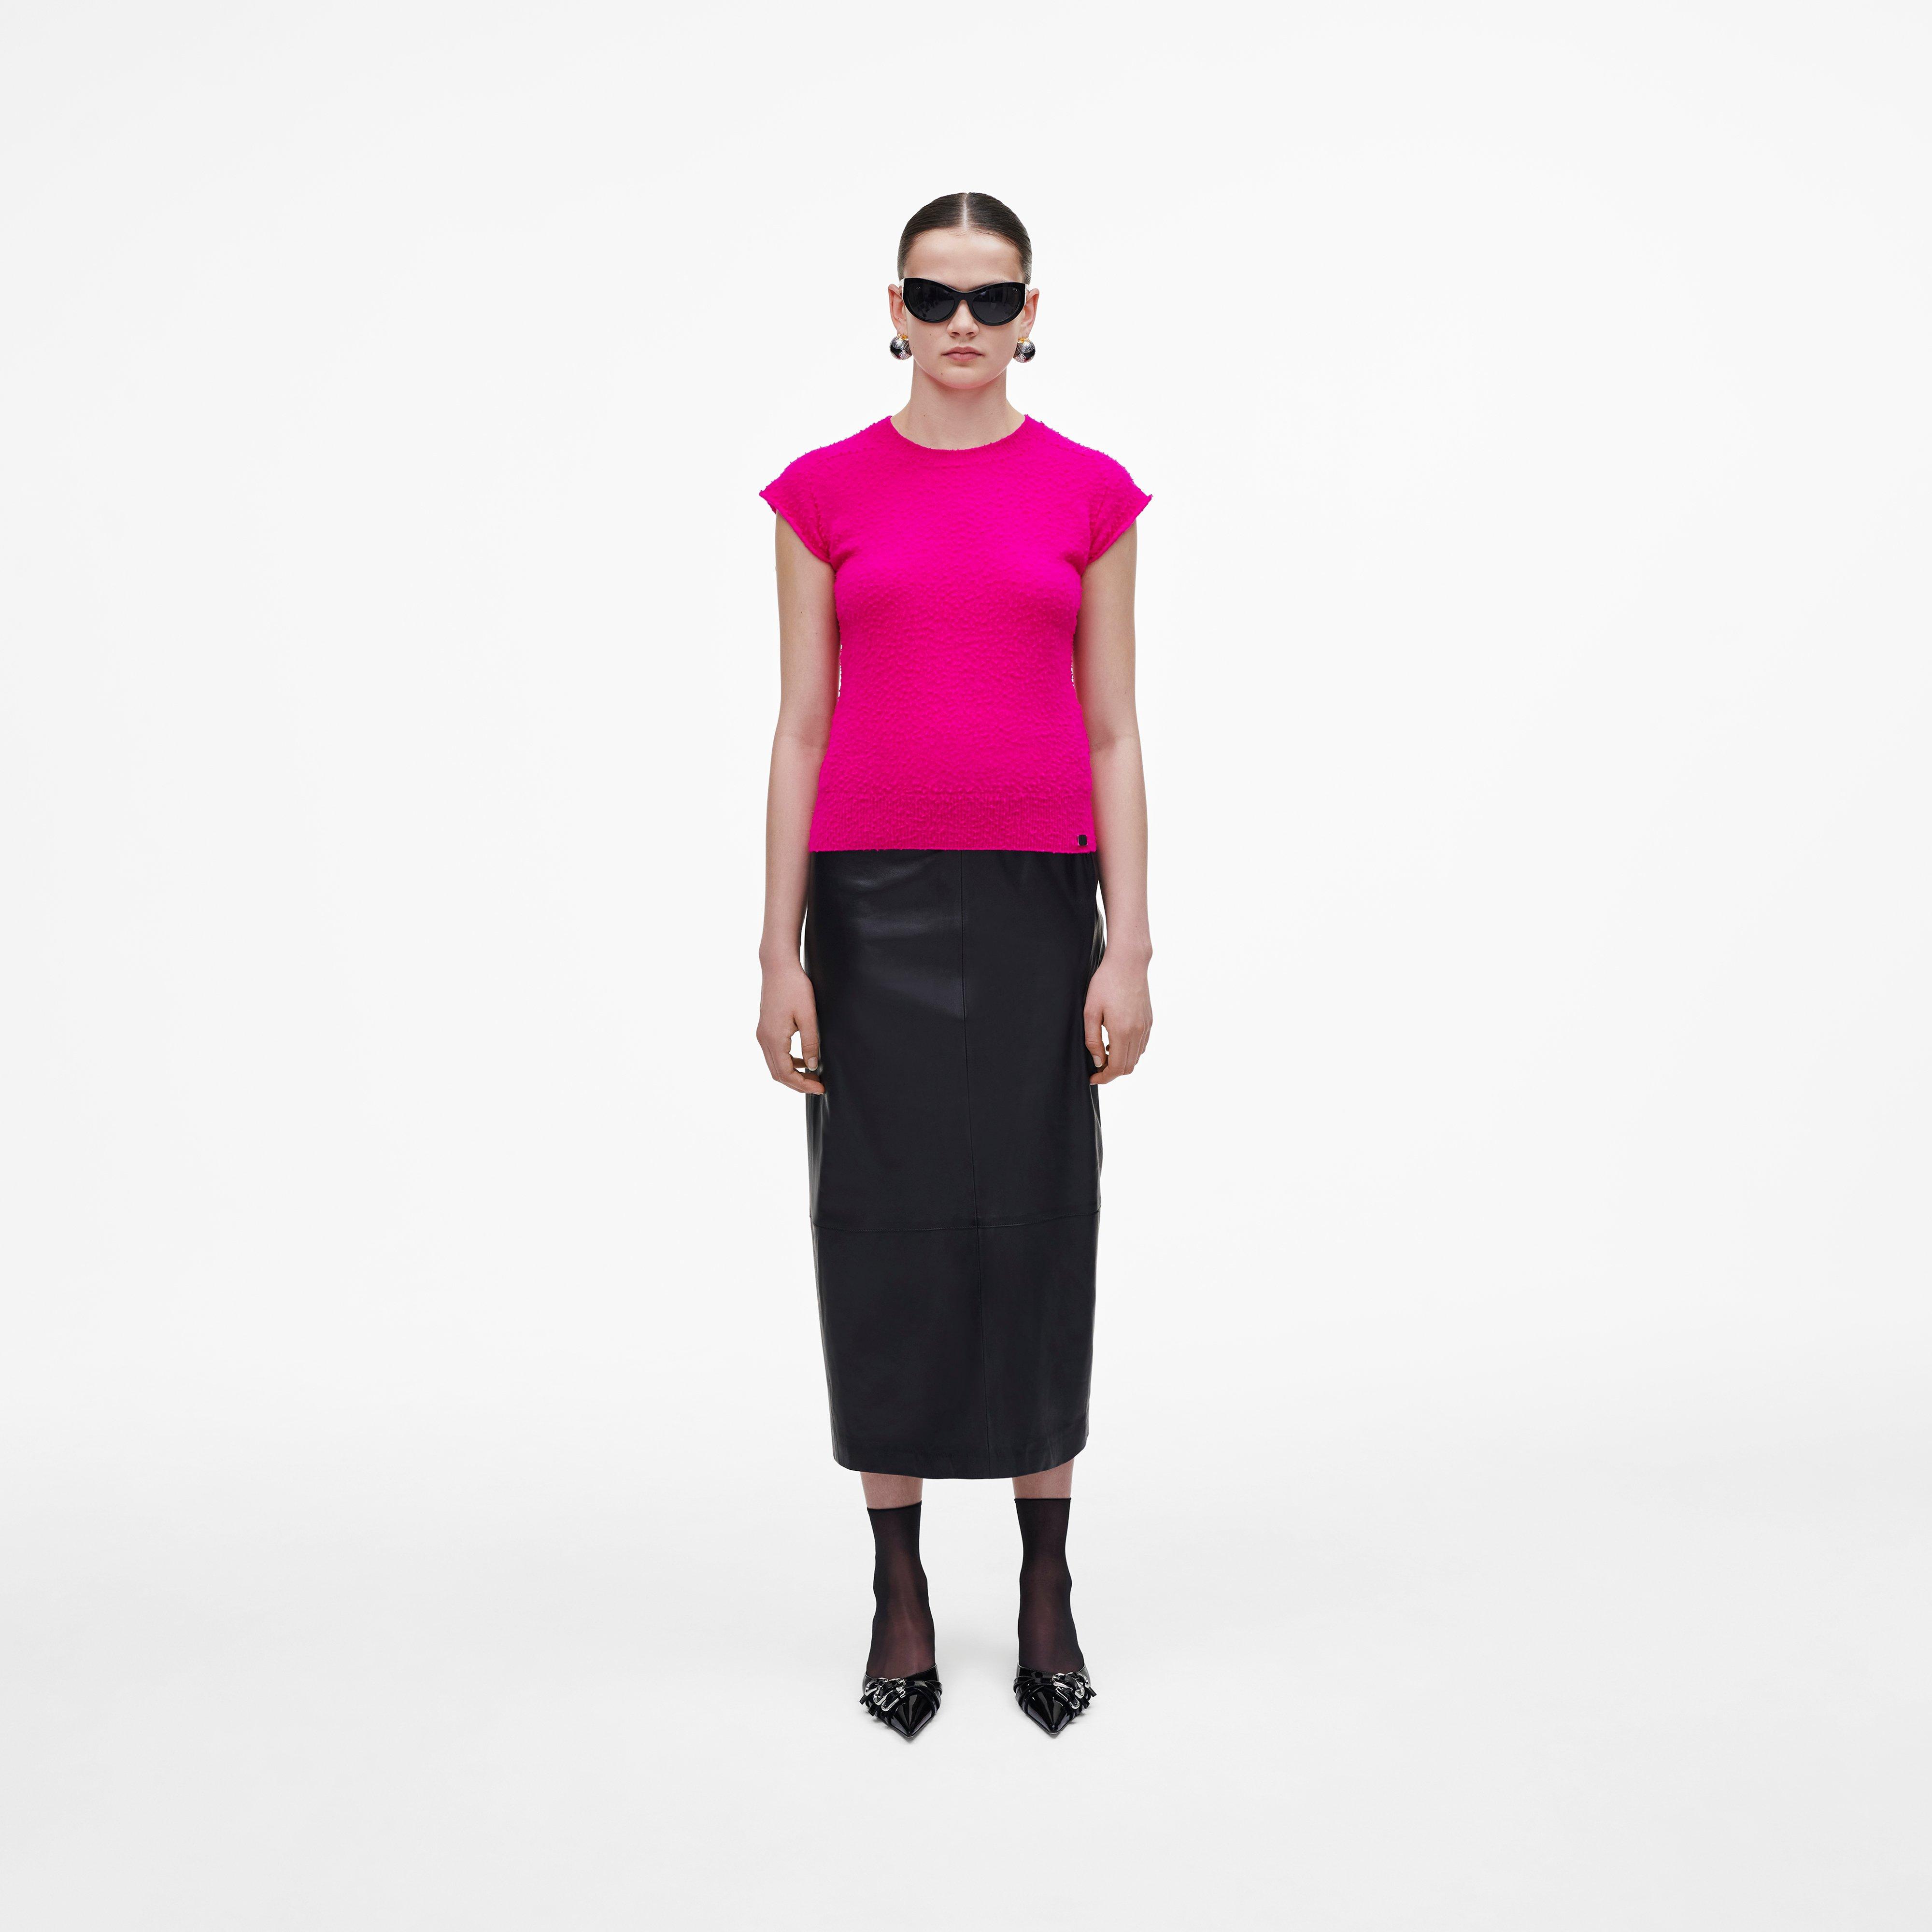 Marc by Marc jacobs Pilled Cap Sleeve Vest,HOT PINK